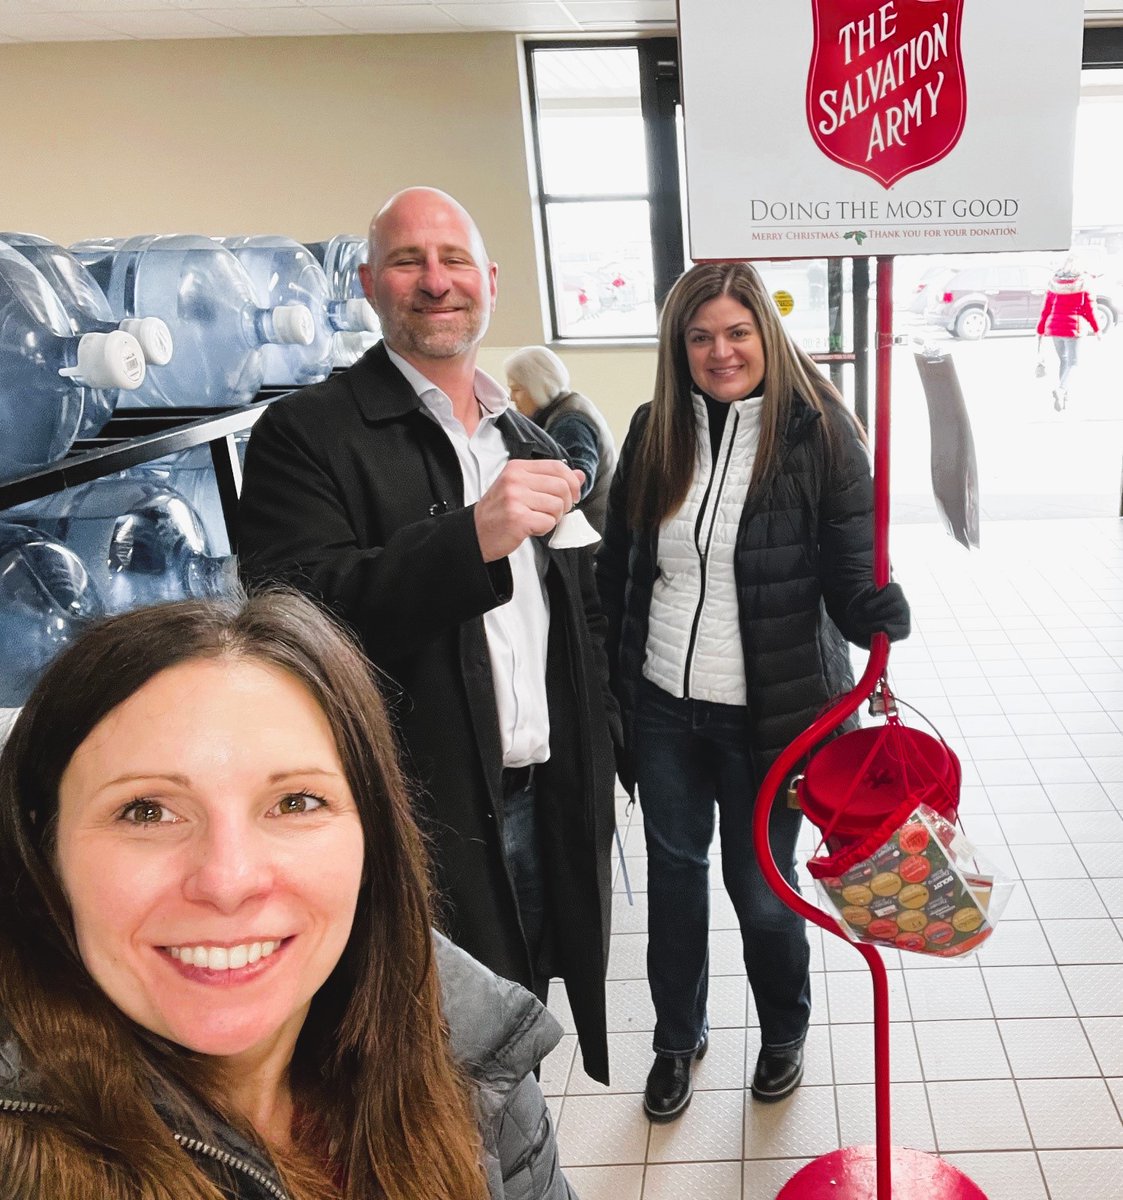 We’re excited to hear that The Salvation Army - Fox Cities welcomed 55% new ringers this year for the Red Kettle Campaign. And we’re proud that J. J. Keller associates – including our executive leadership team – ring bells every year! #redkettle #jjkellerdifference